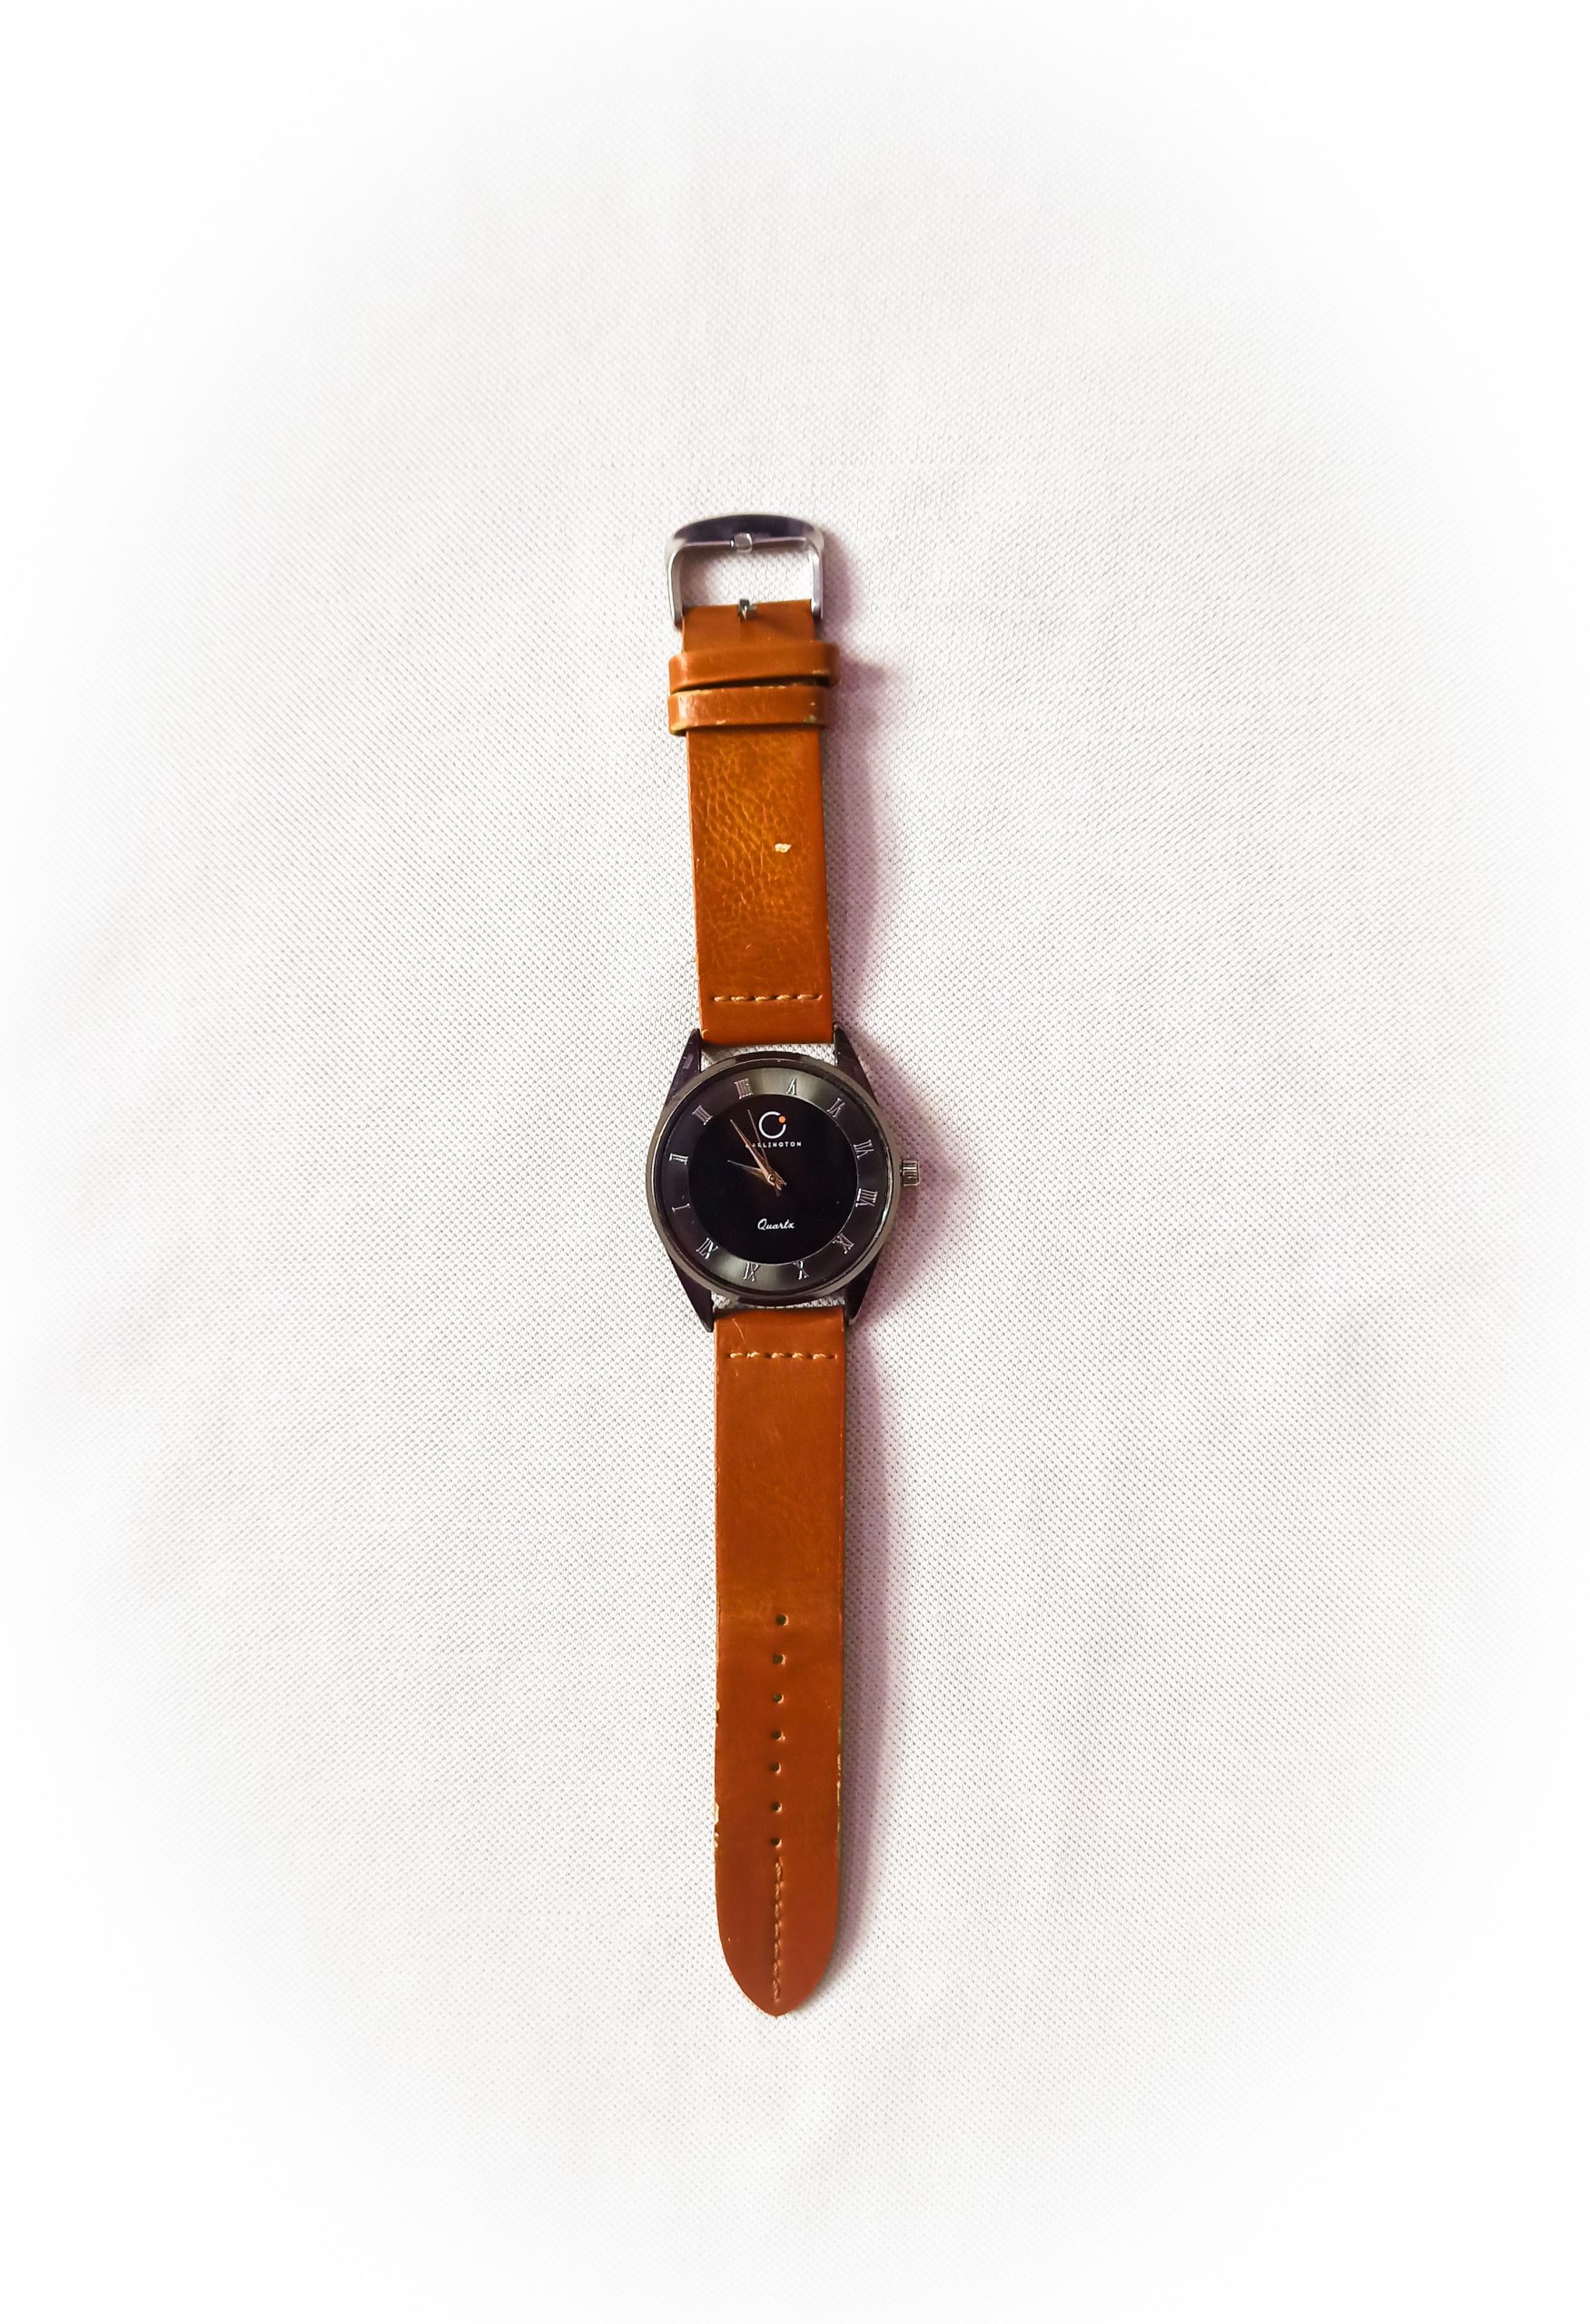 Watch with white background